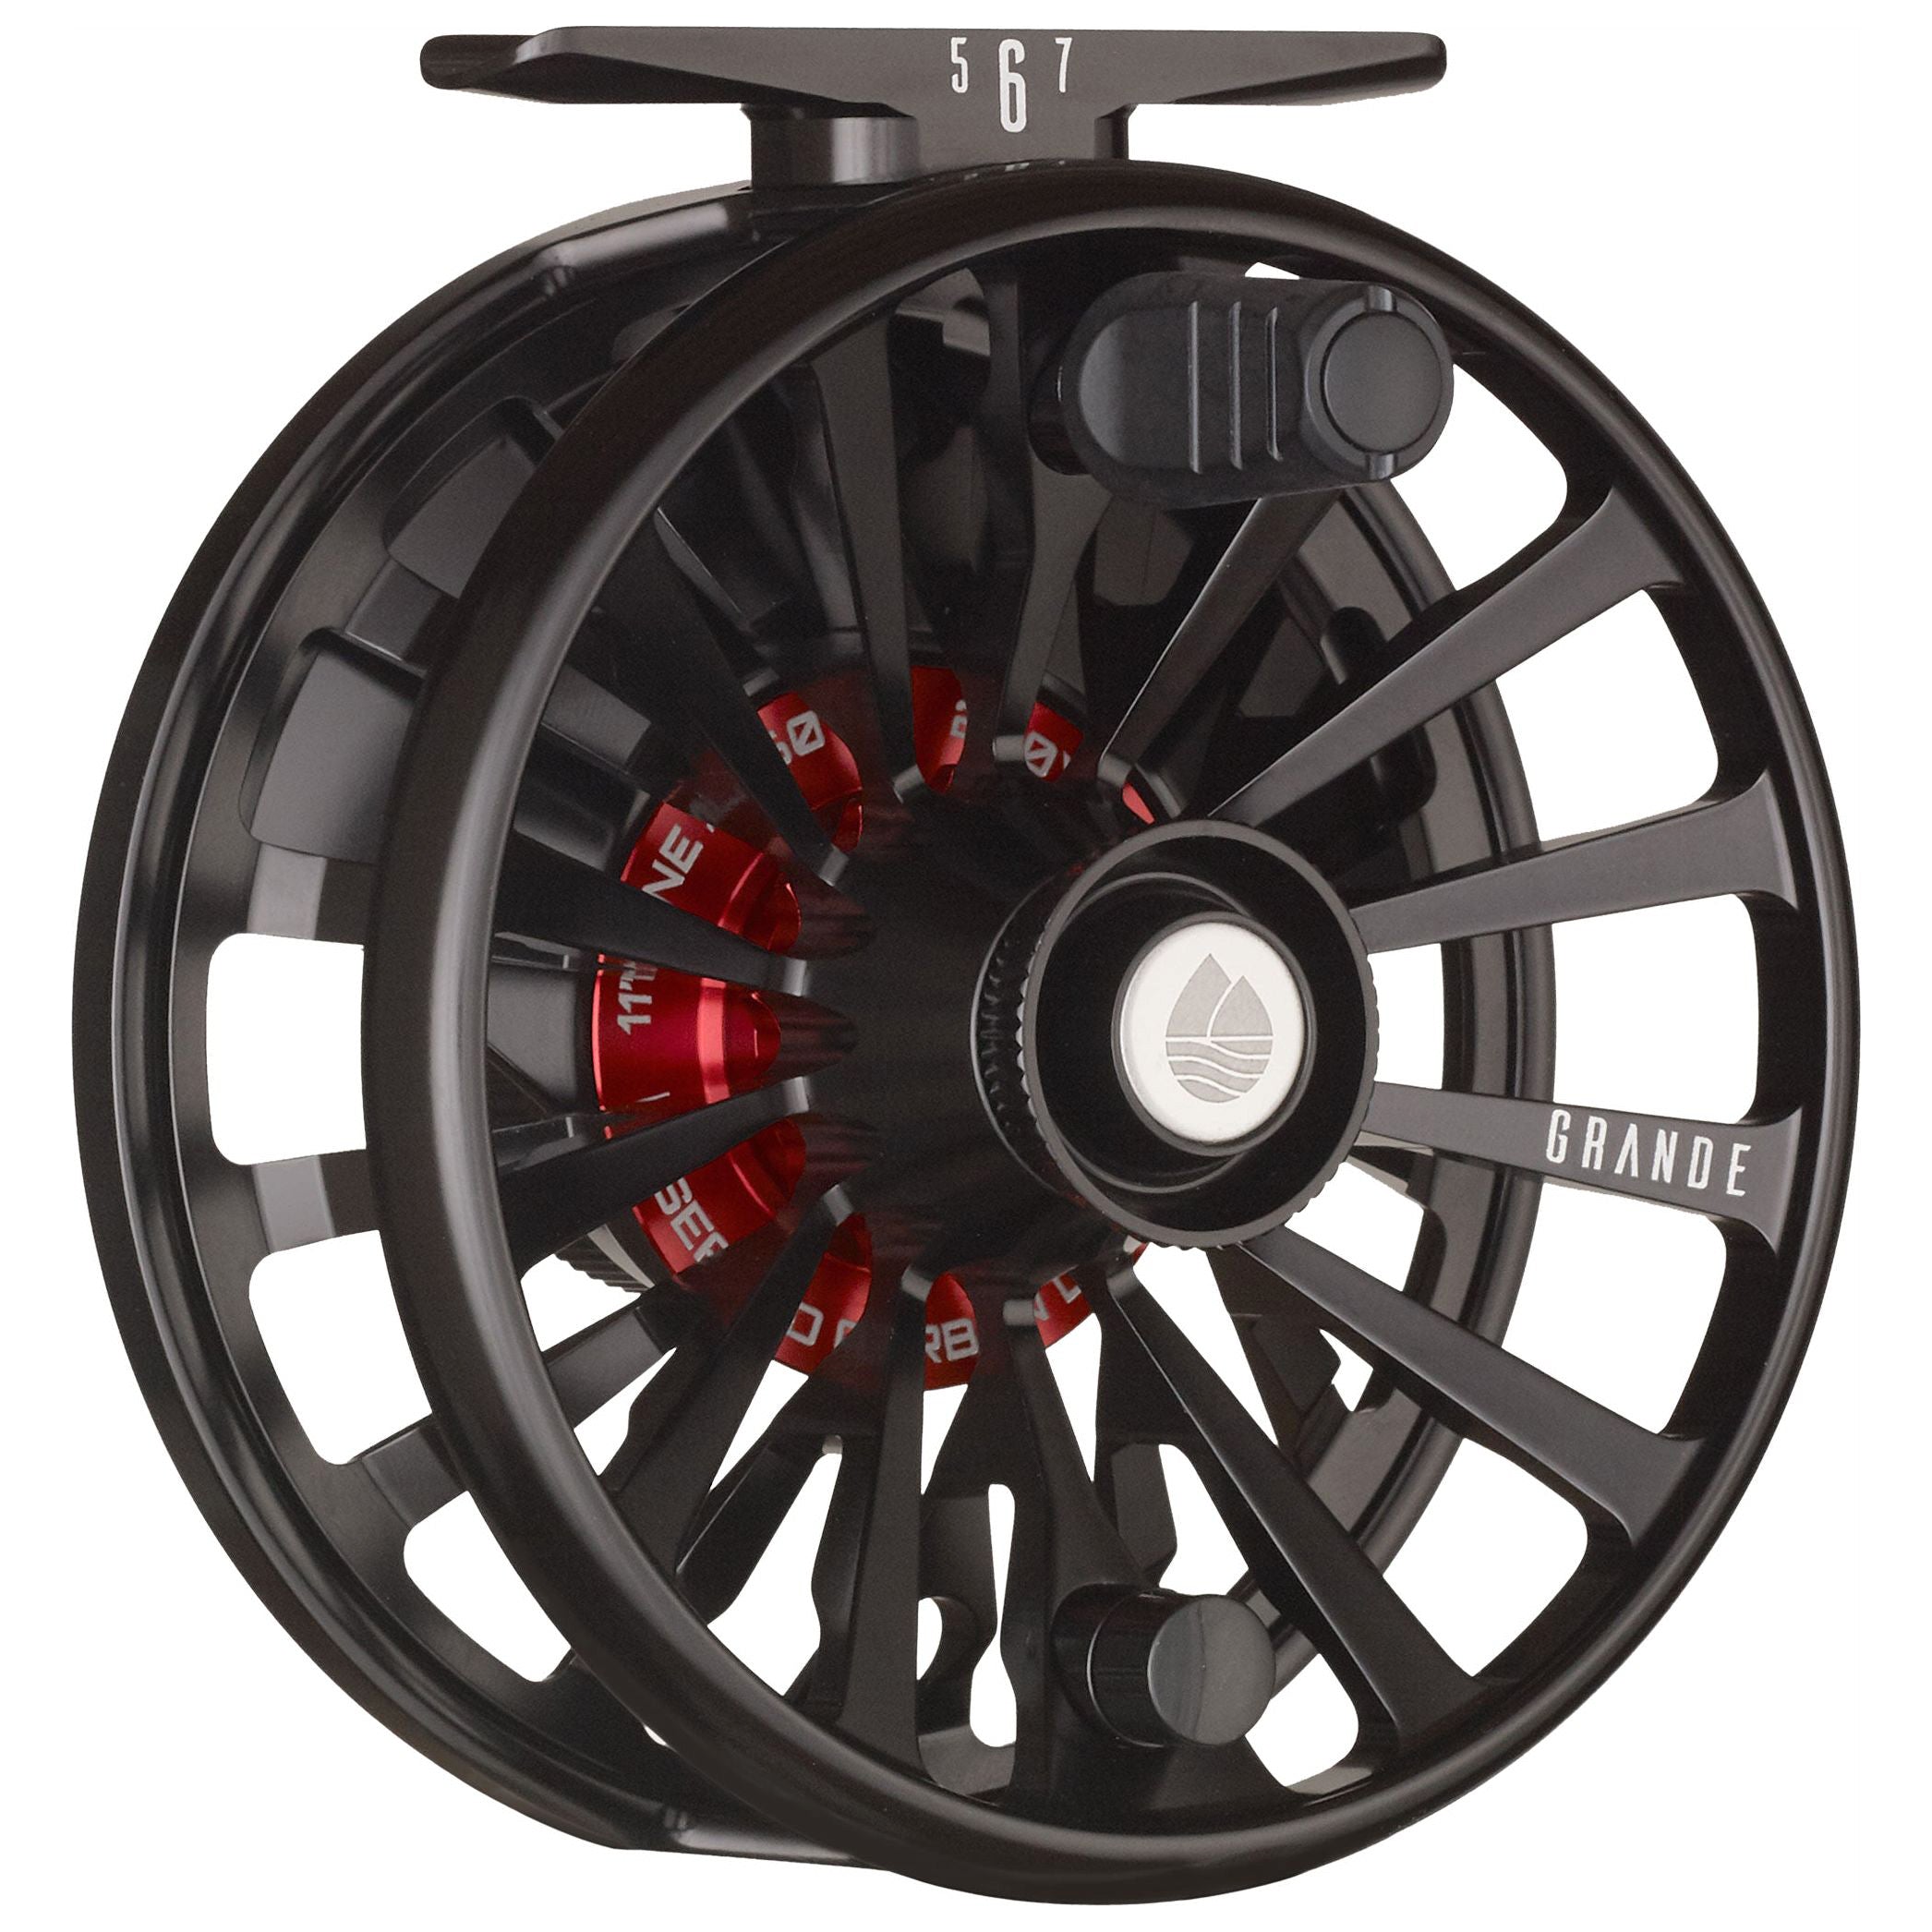 Abel SDS Limited Edition Paul Puckett Reel – Tailwaters Fly Fishing